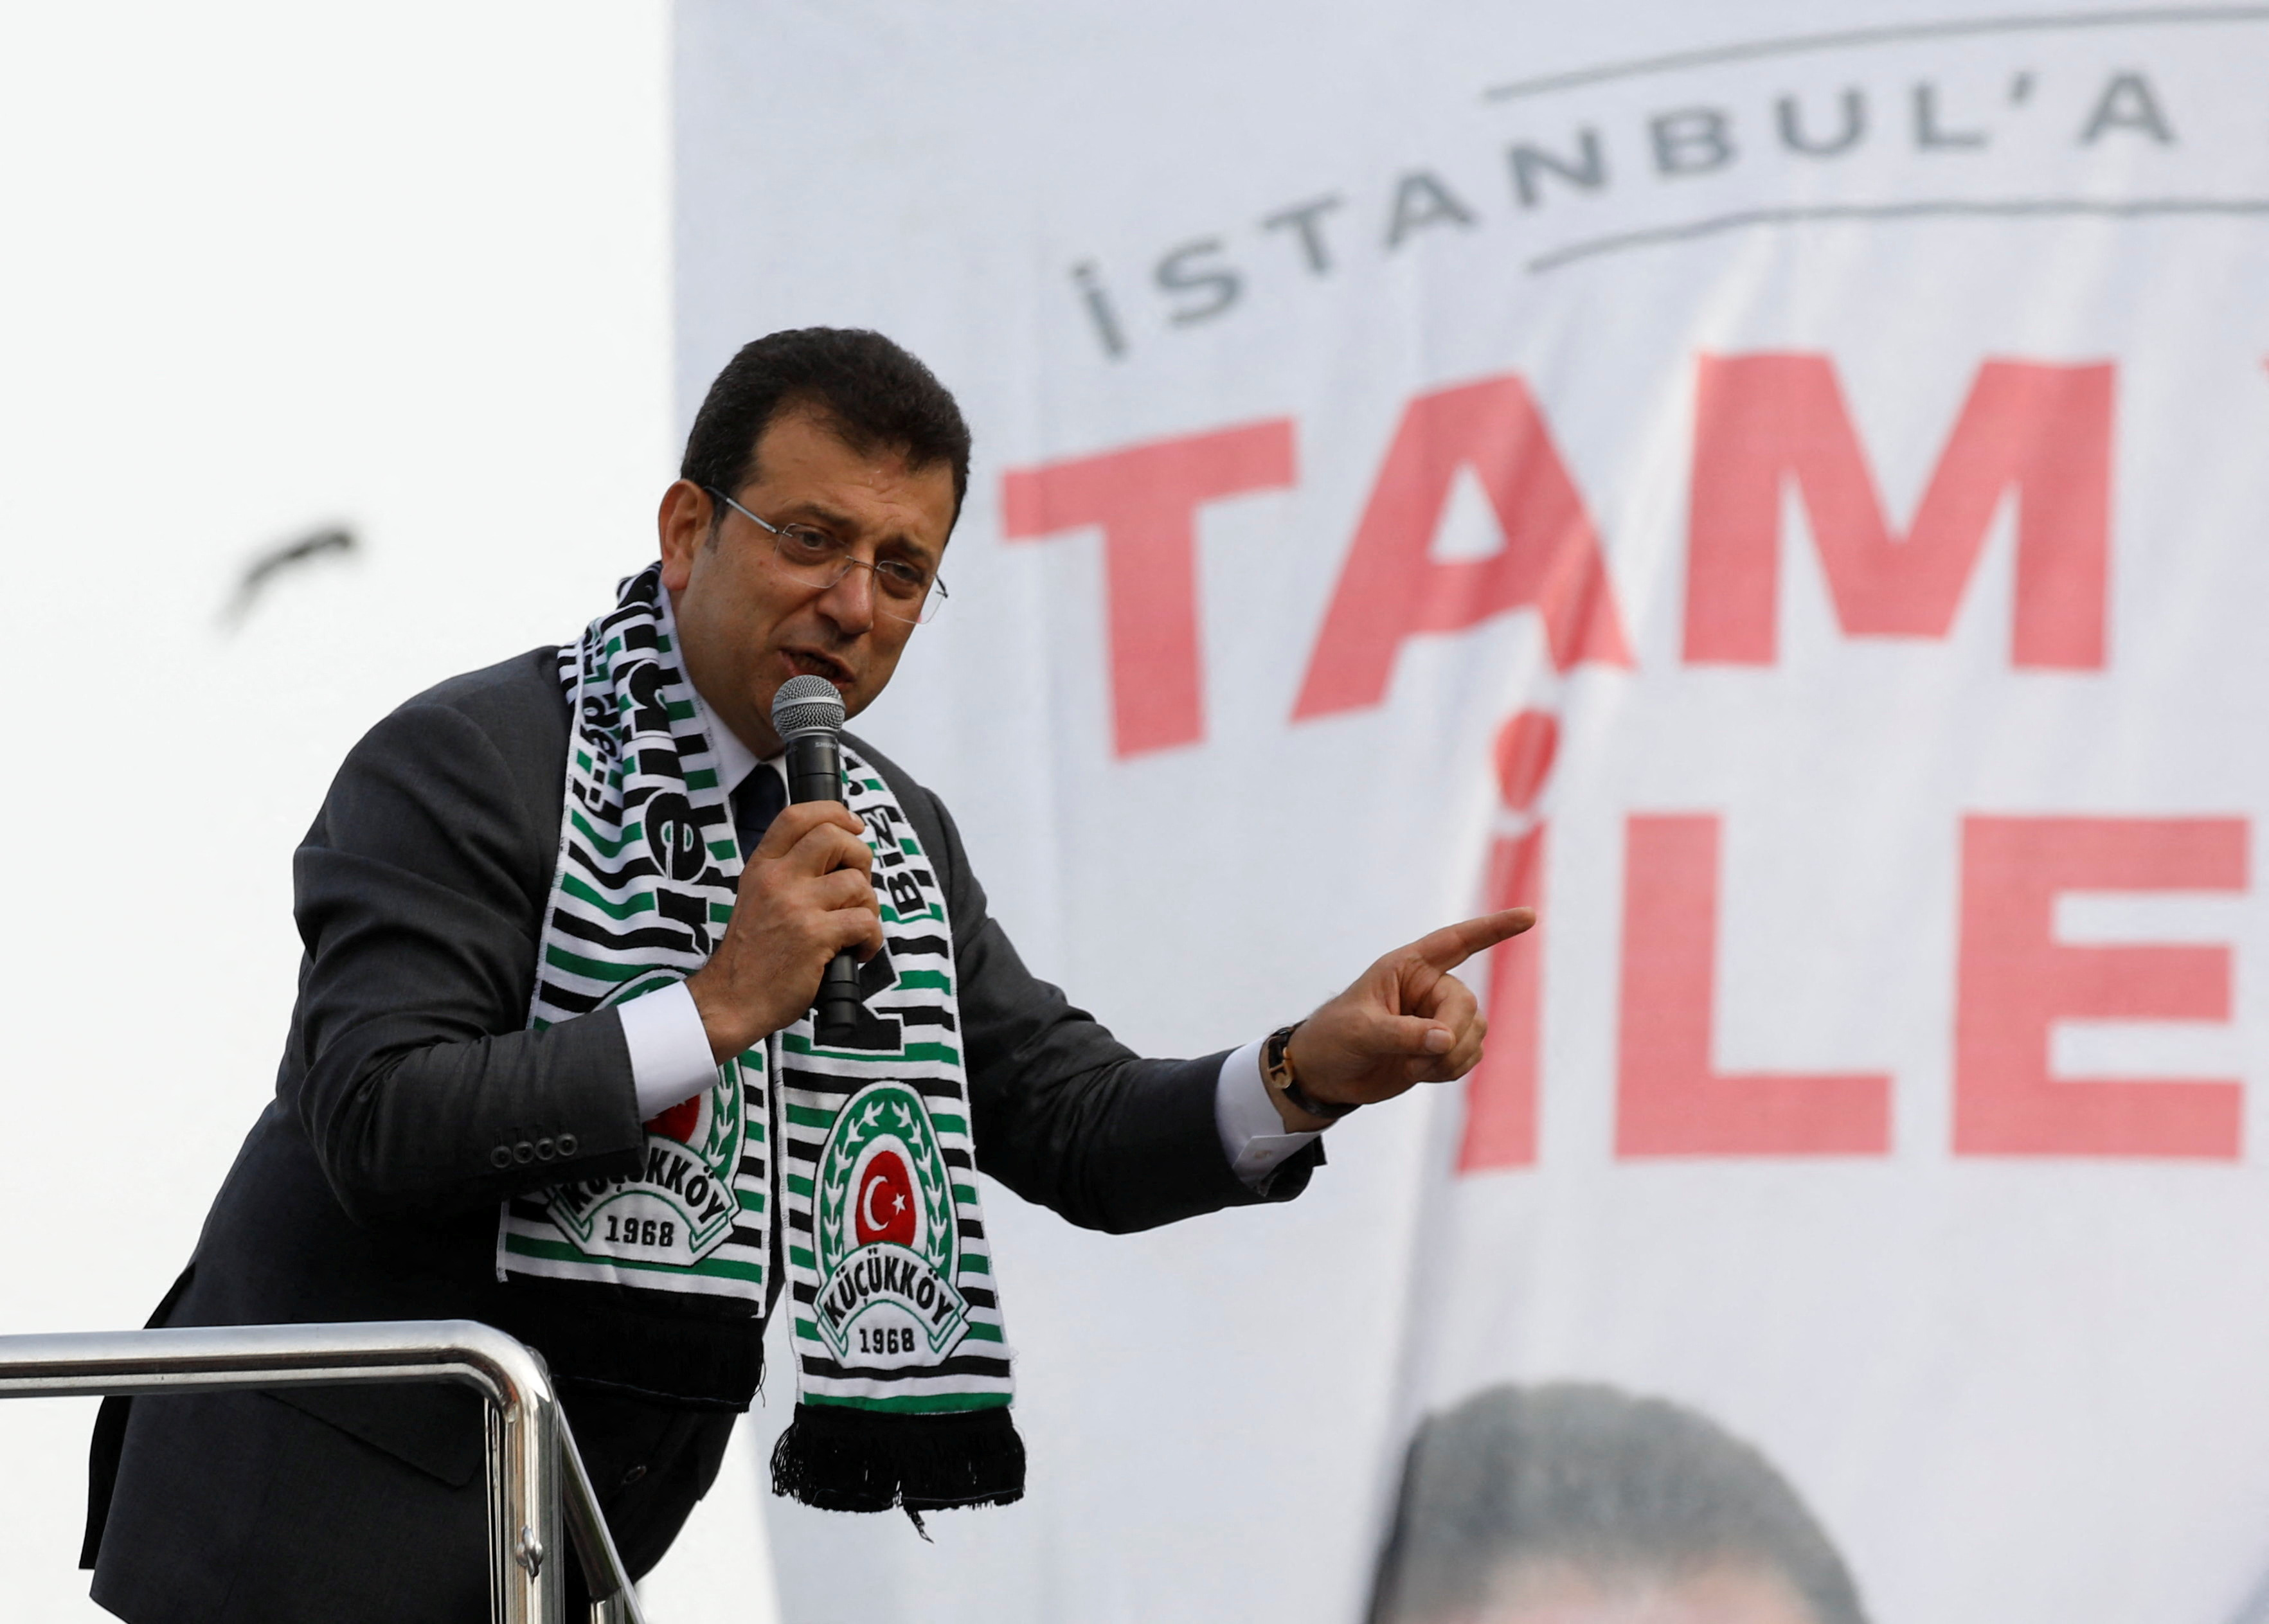 Istanbul's Mayor Imamoglu speaks during an election rally in Istanbul